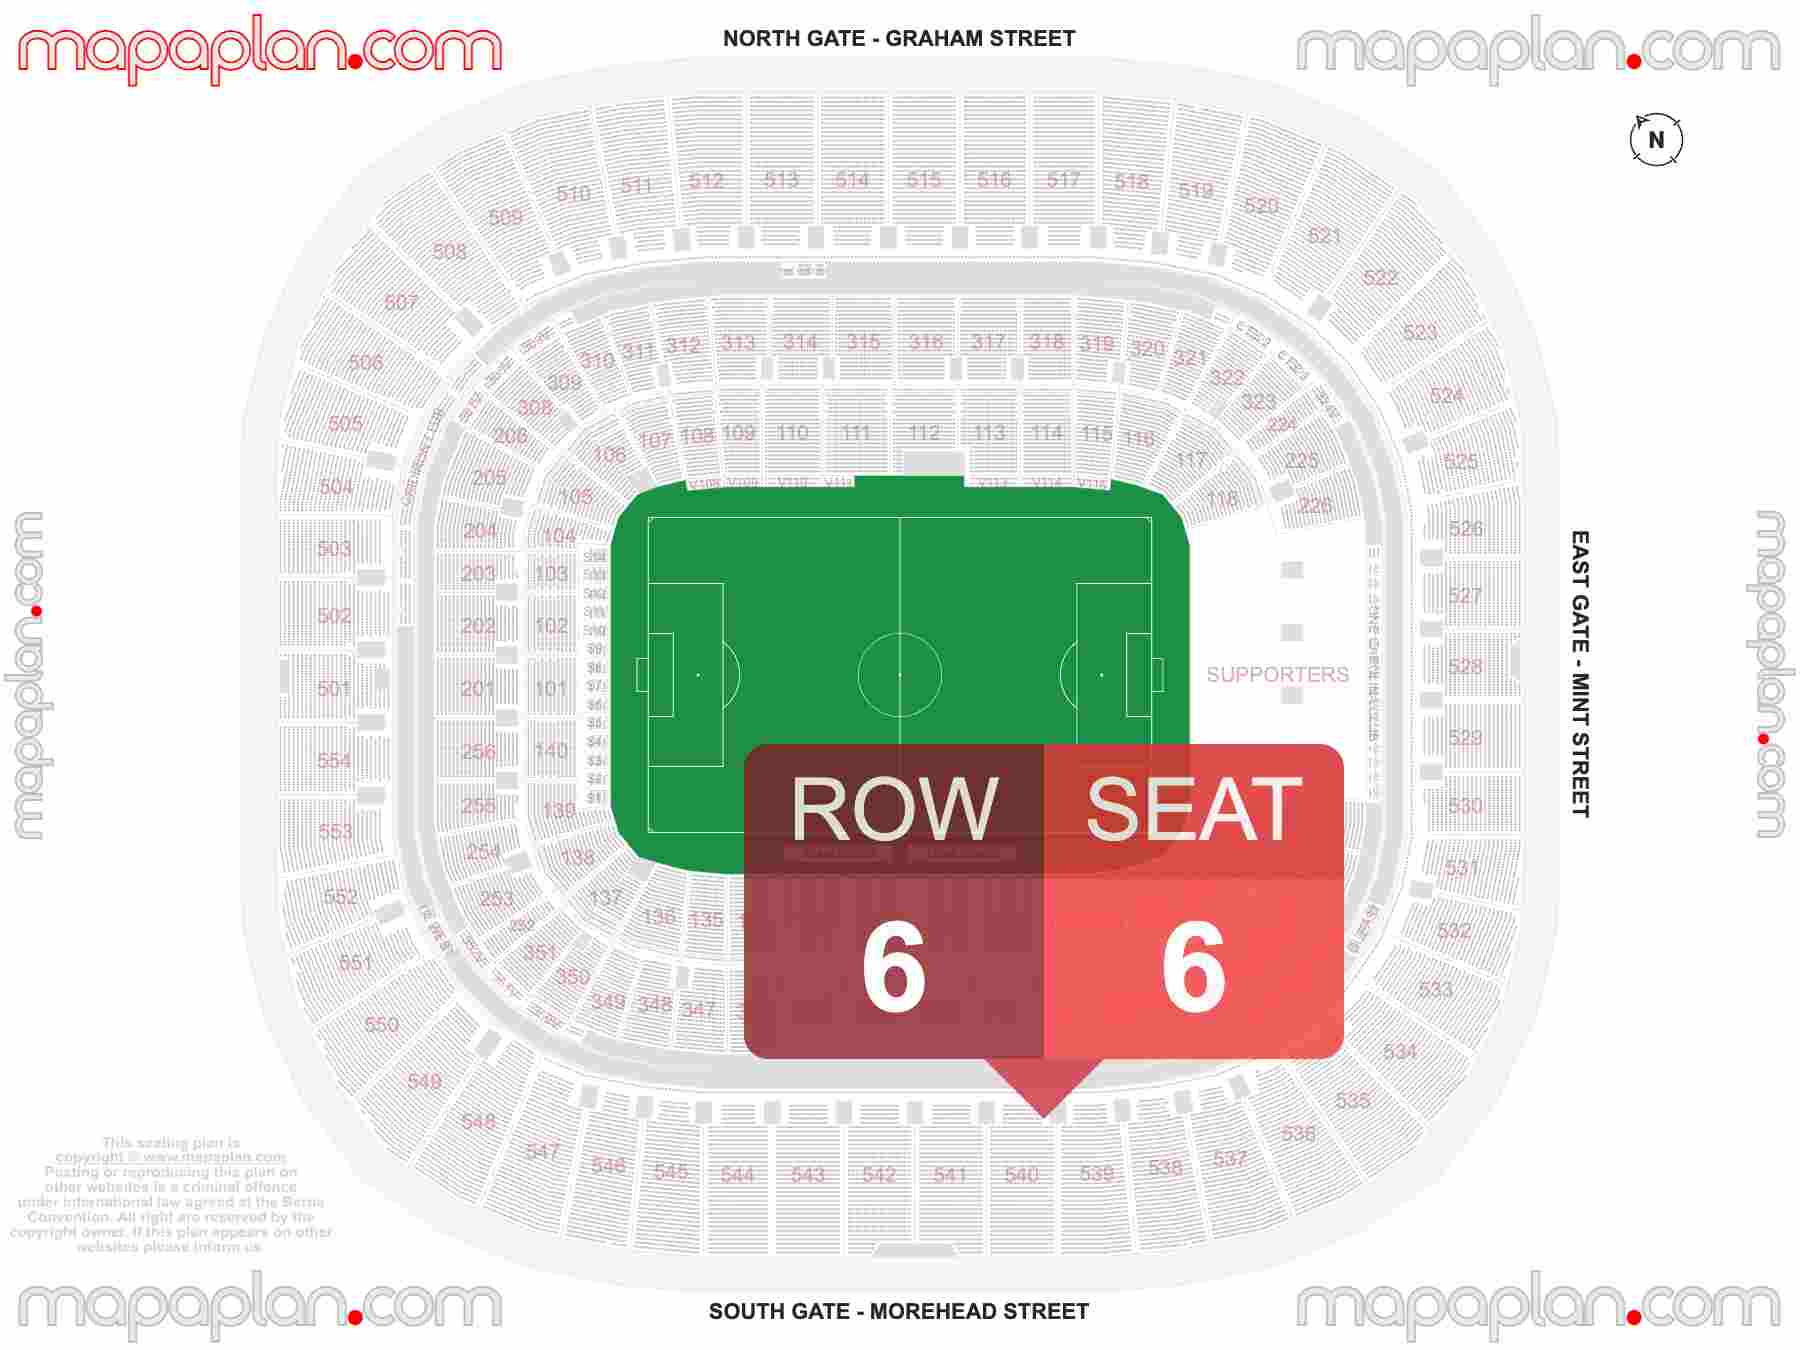 Charlotte Bank of America Stadium seating chart Soccer find best seats row numbering system plan showing how many seats per row - Individual 'find my seat' virtual locator